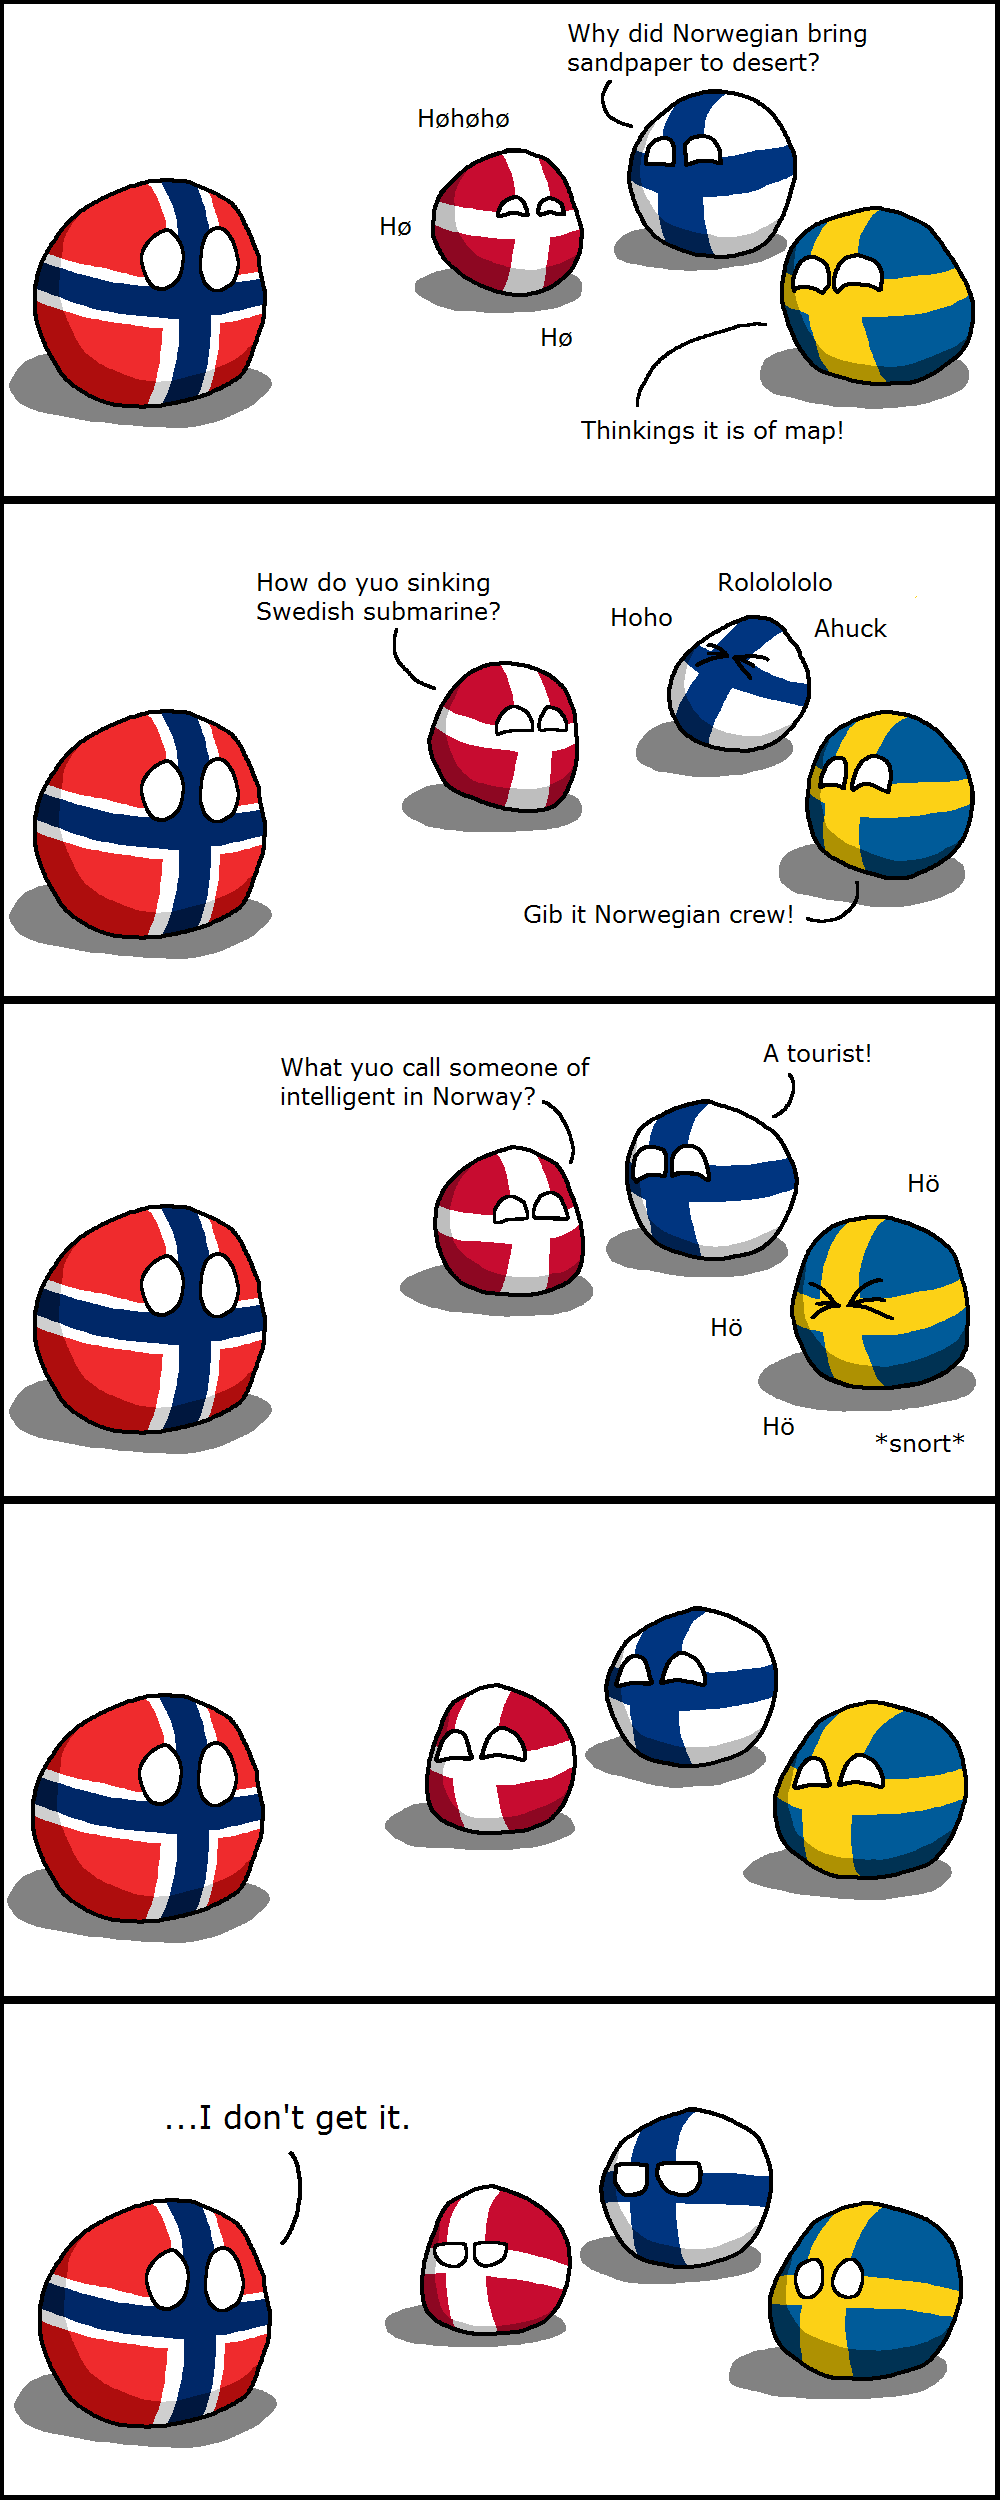 Norway doesn't understand.